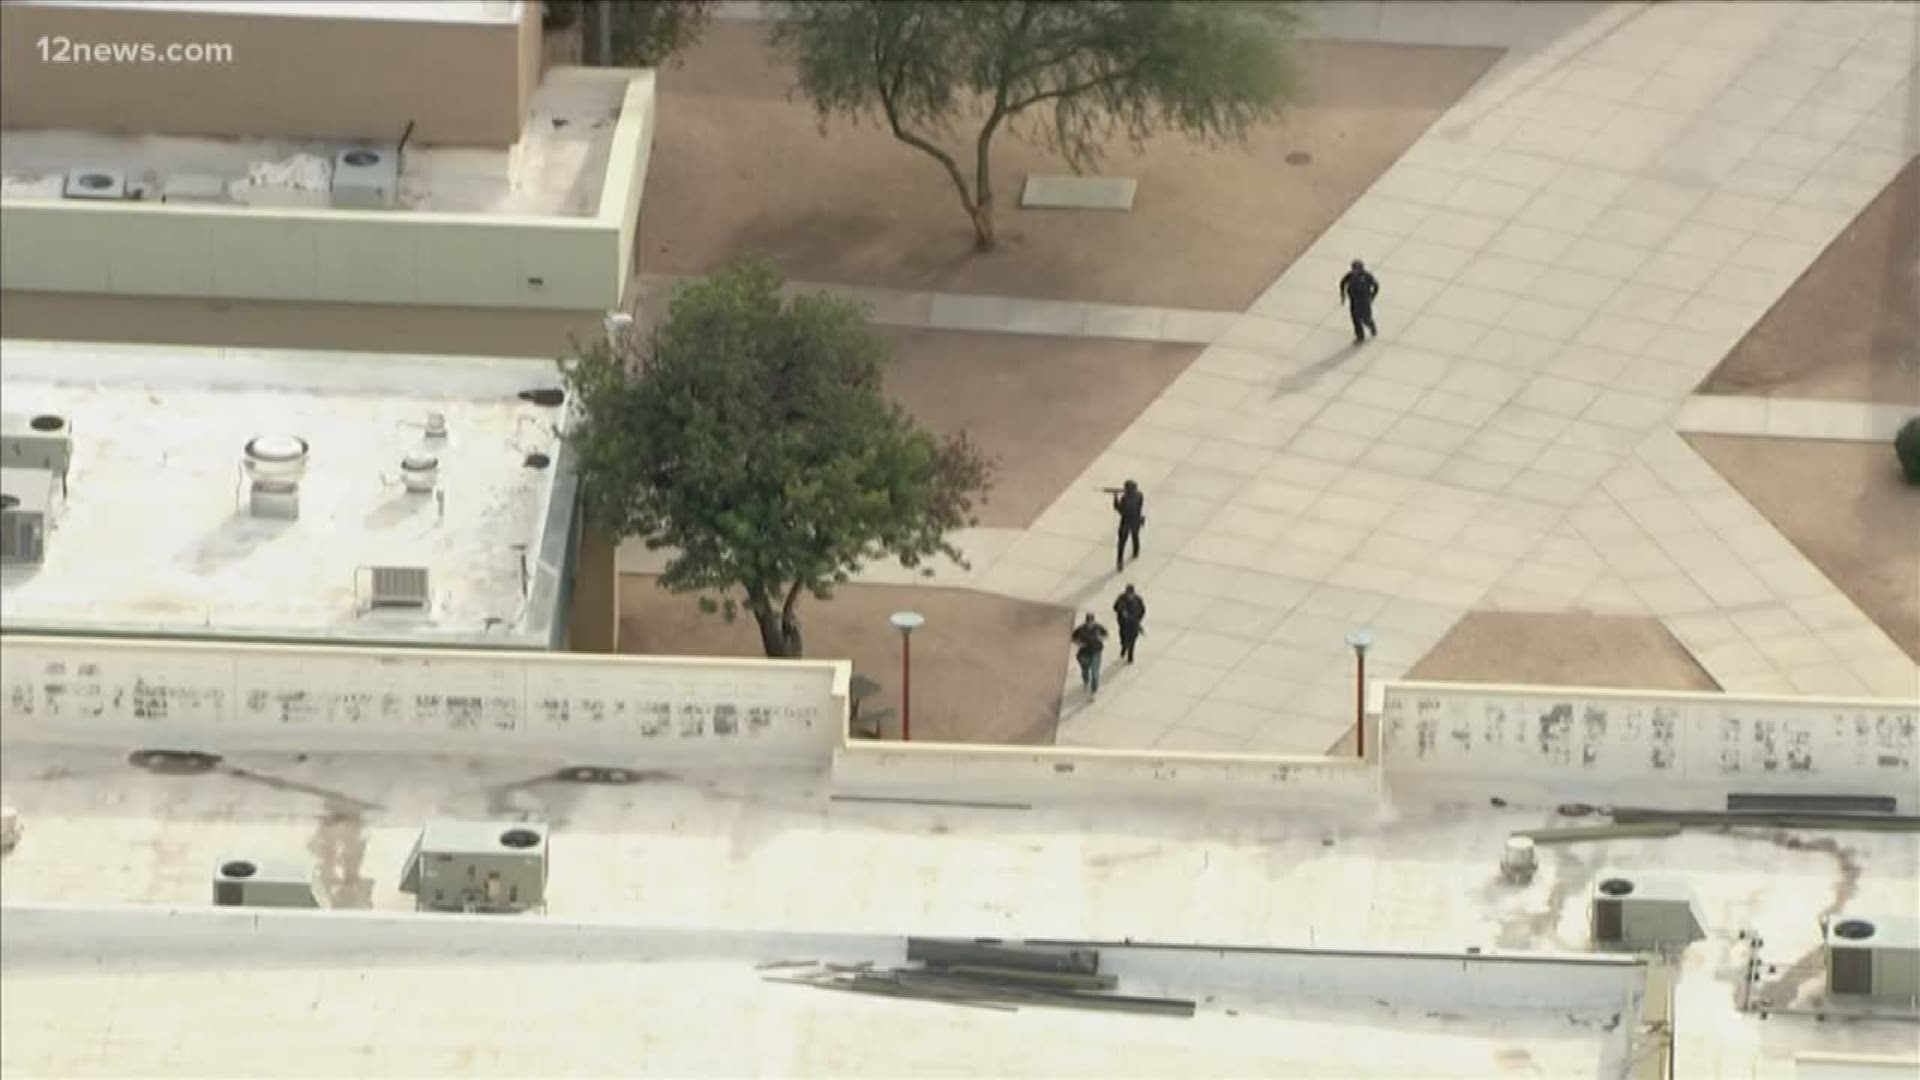 Students at Apache Junction High School were in lockdown for about an hour this afternoon after a caller falsely reported a shooting at the school. Students are safe, but tension was high as today marks the 6th anniversary of the Sandy Hook shooting.